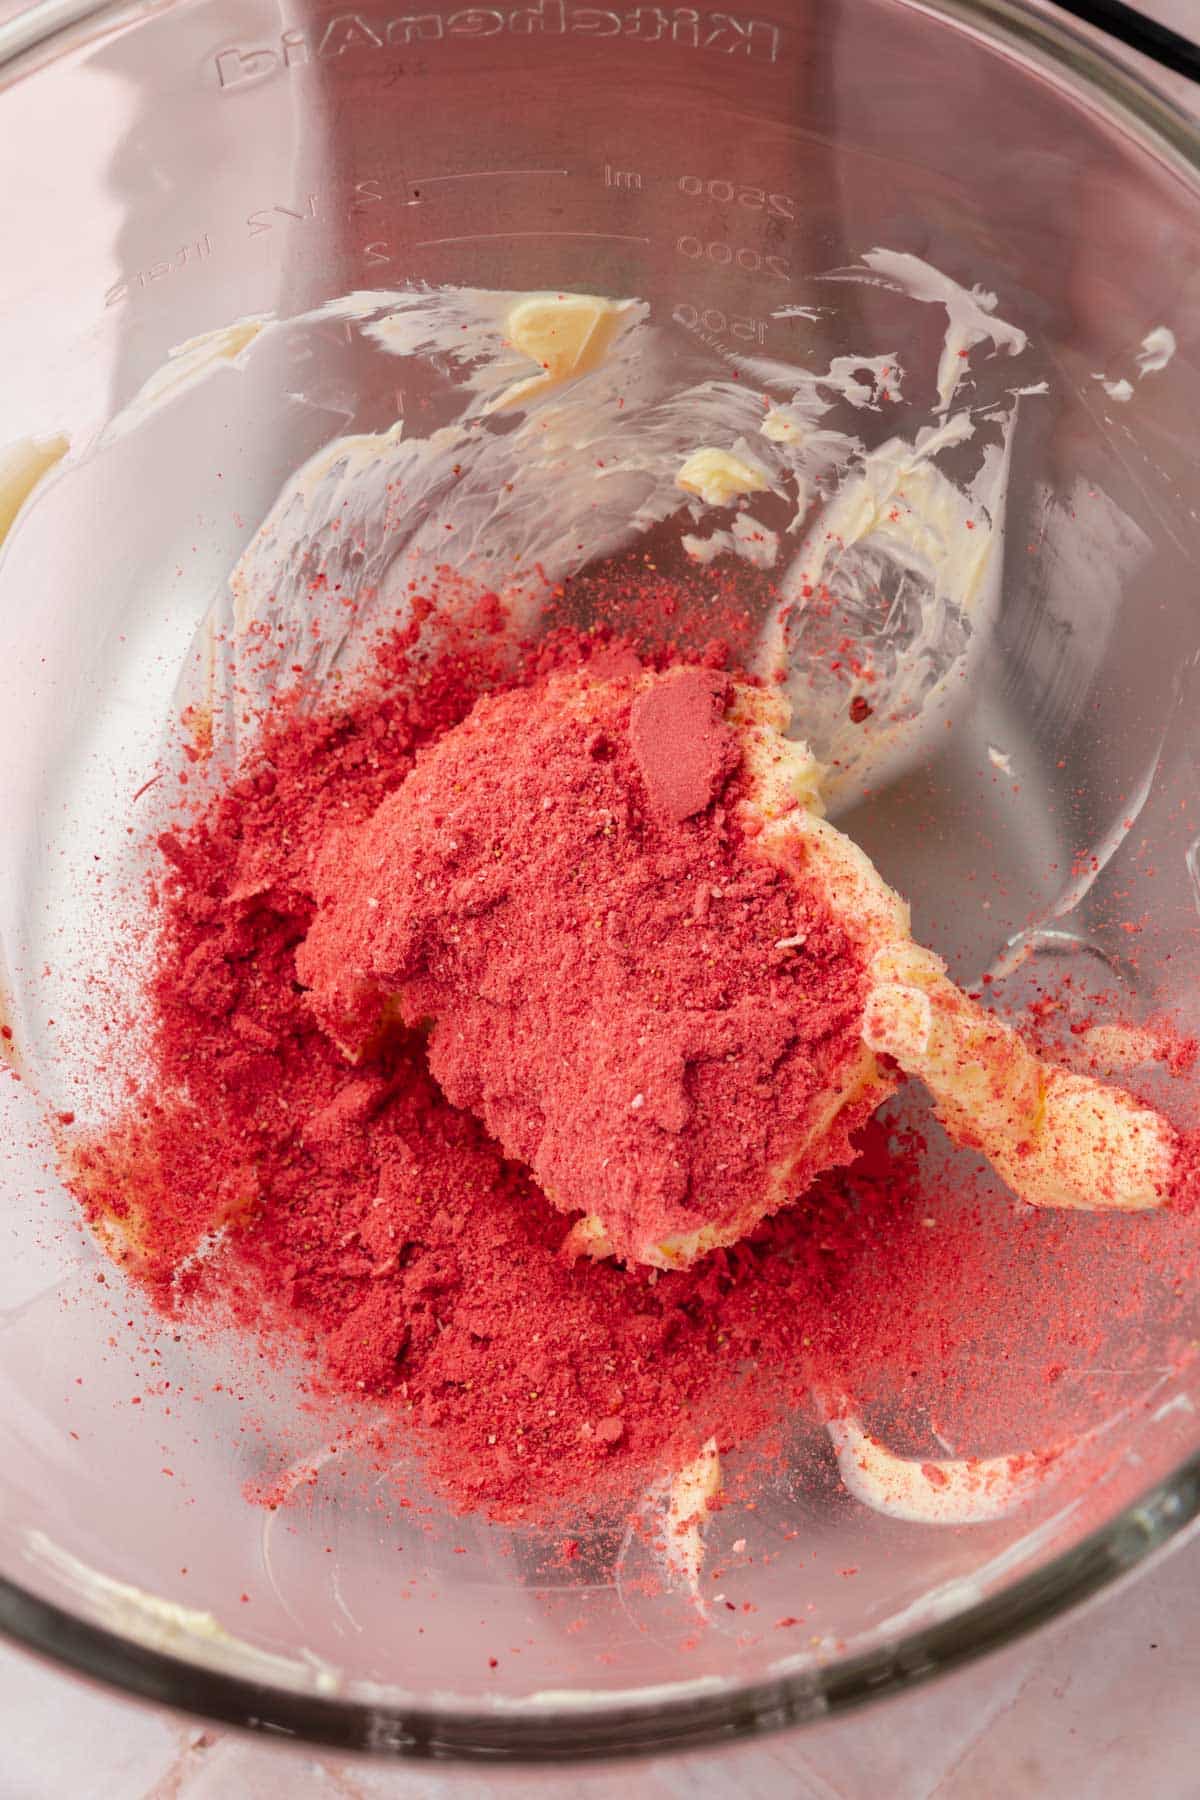 Powdered freeze-dried strawberries and butter in the bowl of a stand mixer.